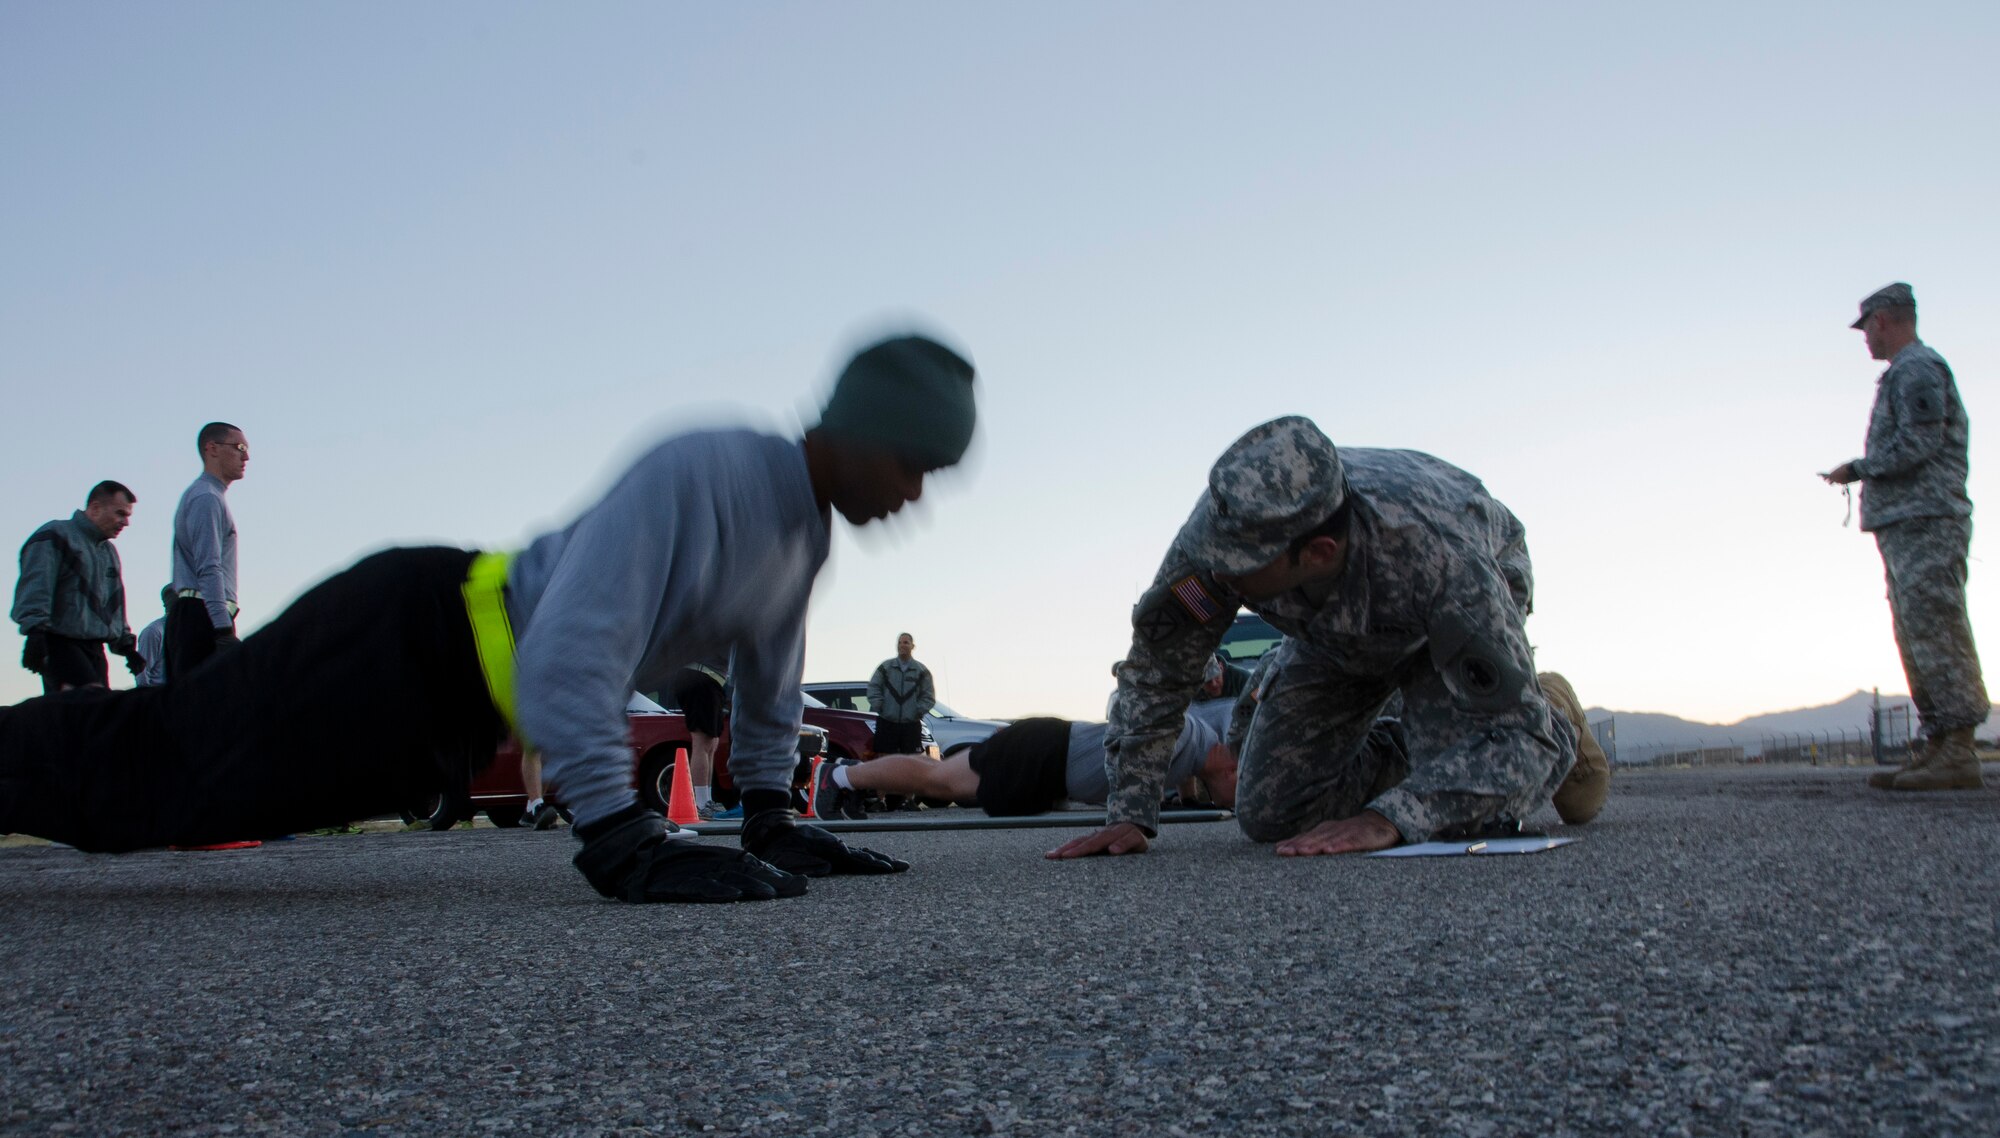 A member of the 1st Battlefield Coordination Detachment performs push-ups during the Army physical fitness test at Davis-Monthan AFB, Ariz., Nov. 4, 2014. Once all members have completed the push-up portion of the fitness test they will then move on to the sit-up portion. (U.S. Air Force photo by Staff Sgt. Adam Grant/Released)